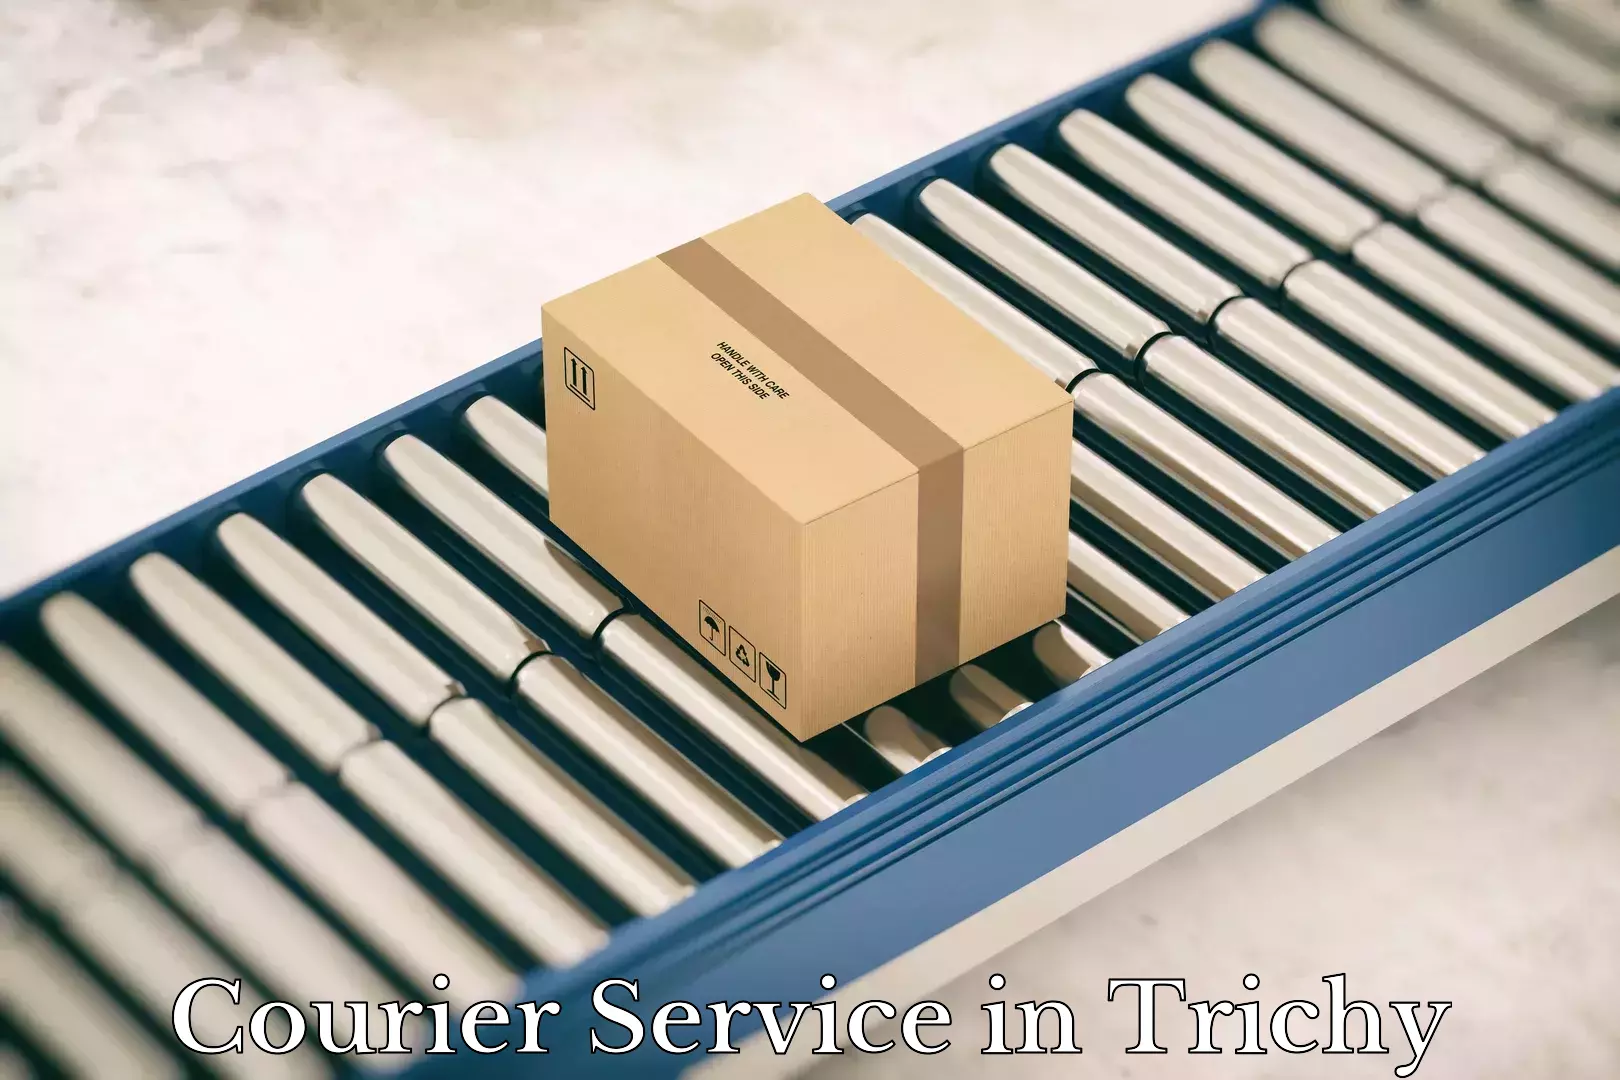 Customer-oriented courier services in Trichy